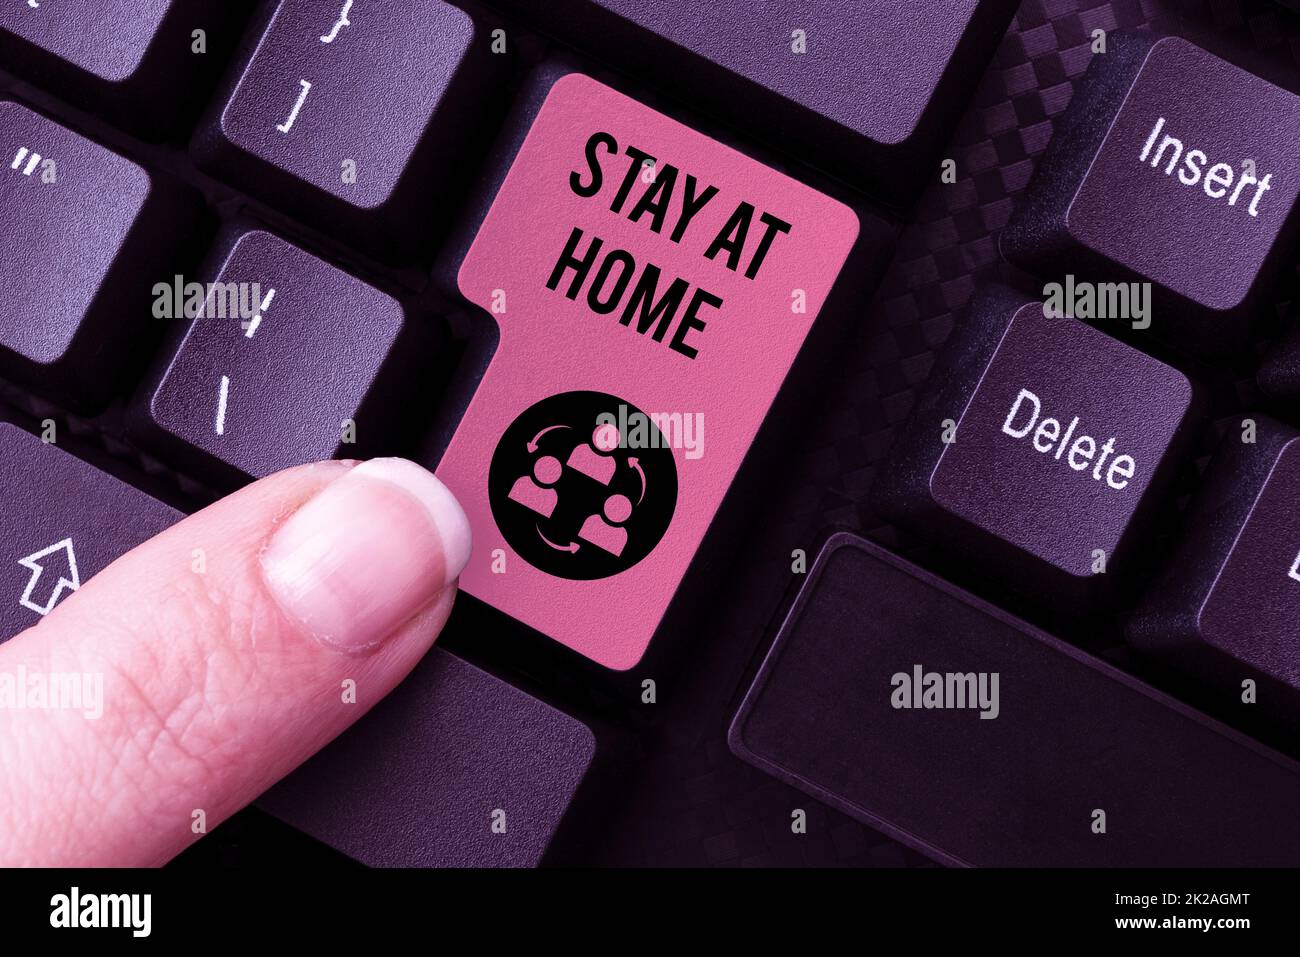 Sign displaying Stay At Home. Business showcase movement control restricting individuals from getting exposed publicly Typing Daily Reminder Notes, Creating Online Writing Presentation Stock Photo